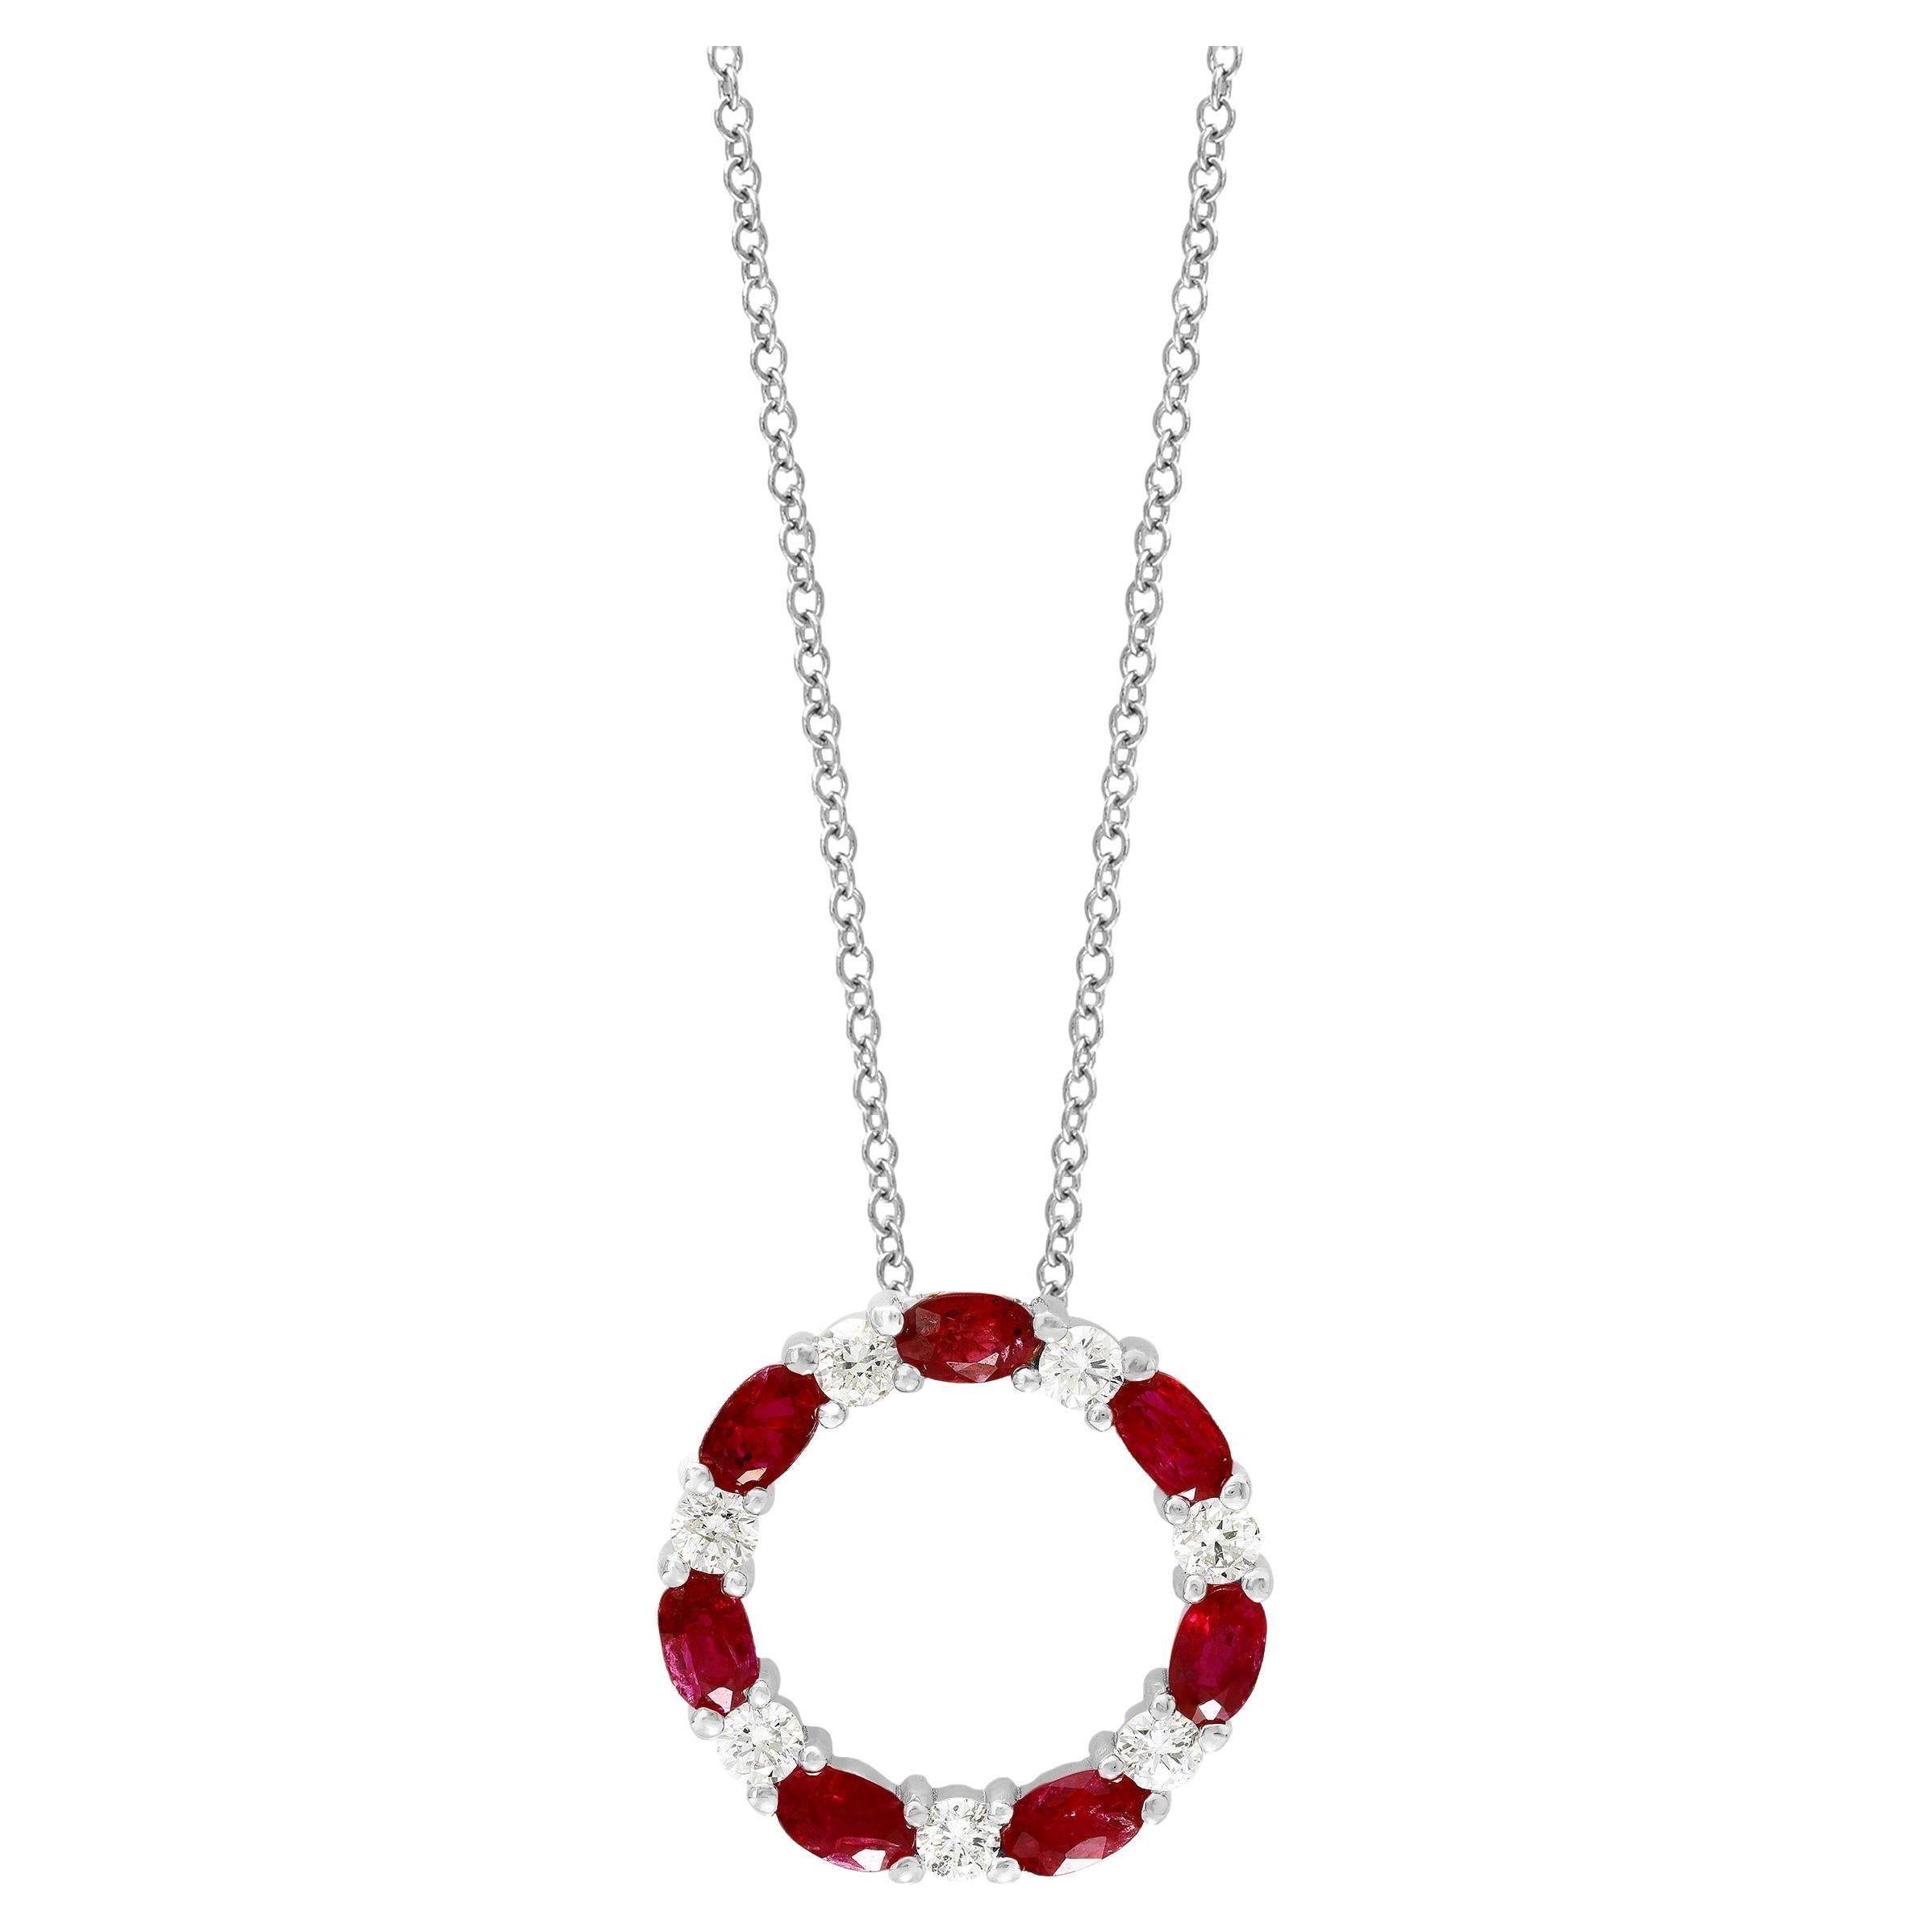 1.99 Carat Ruby and Diamond Circle Pendant Necklace in 14k White Gold